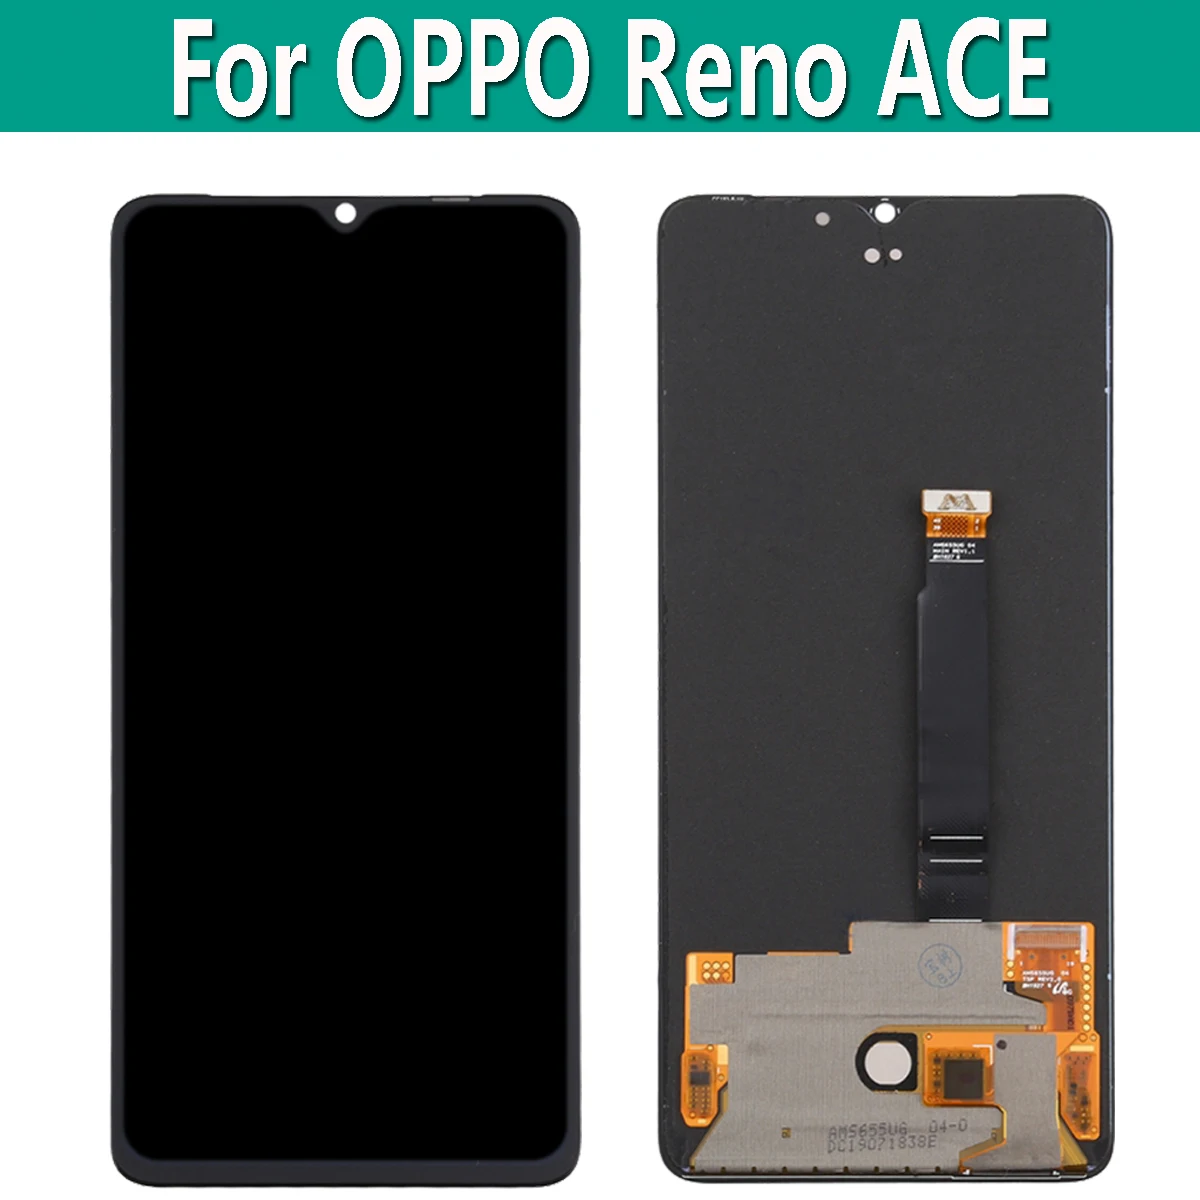 

Original AMOLED LCD Display Touch Digitizer Sensor Assembly Parts Replace 6.55" For OPPO Reno ACE PCLM10 Display